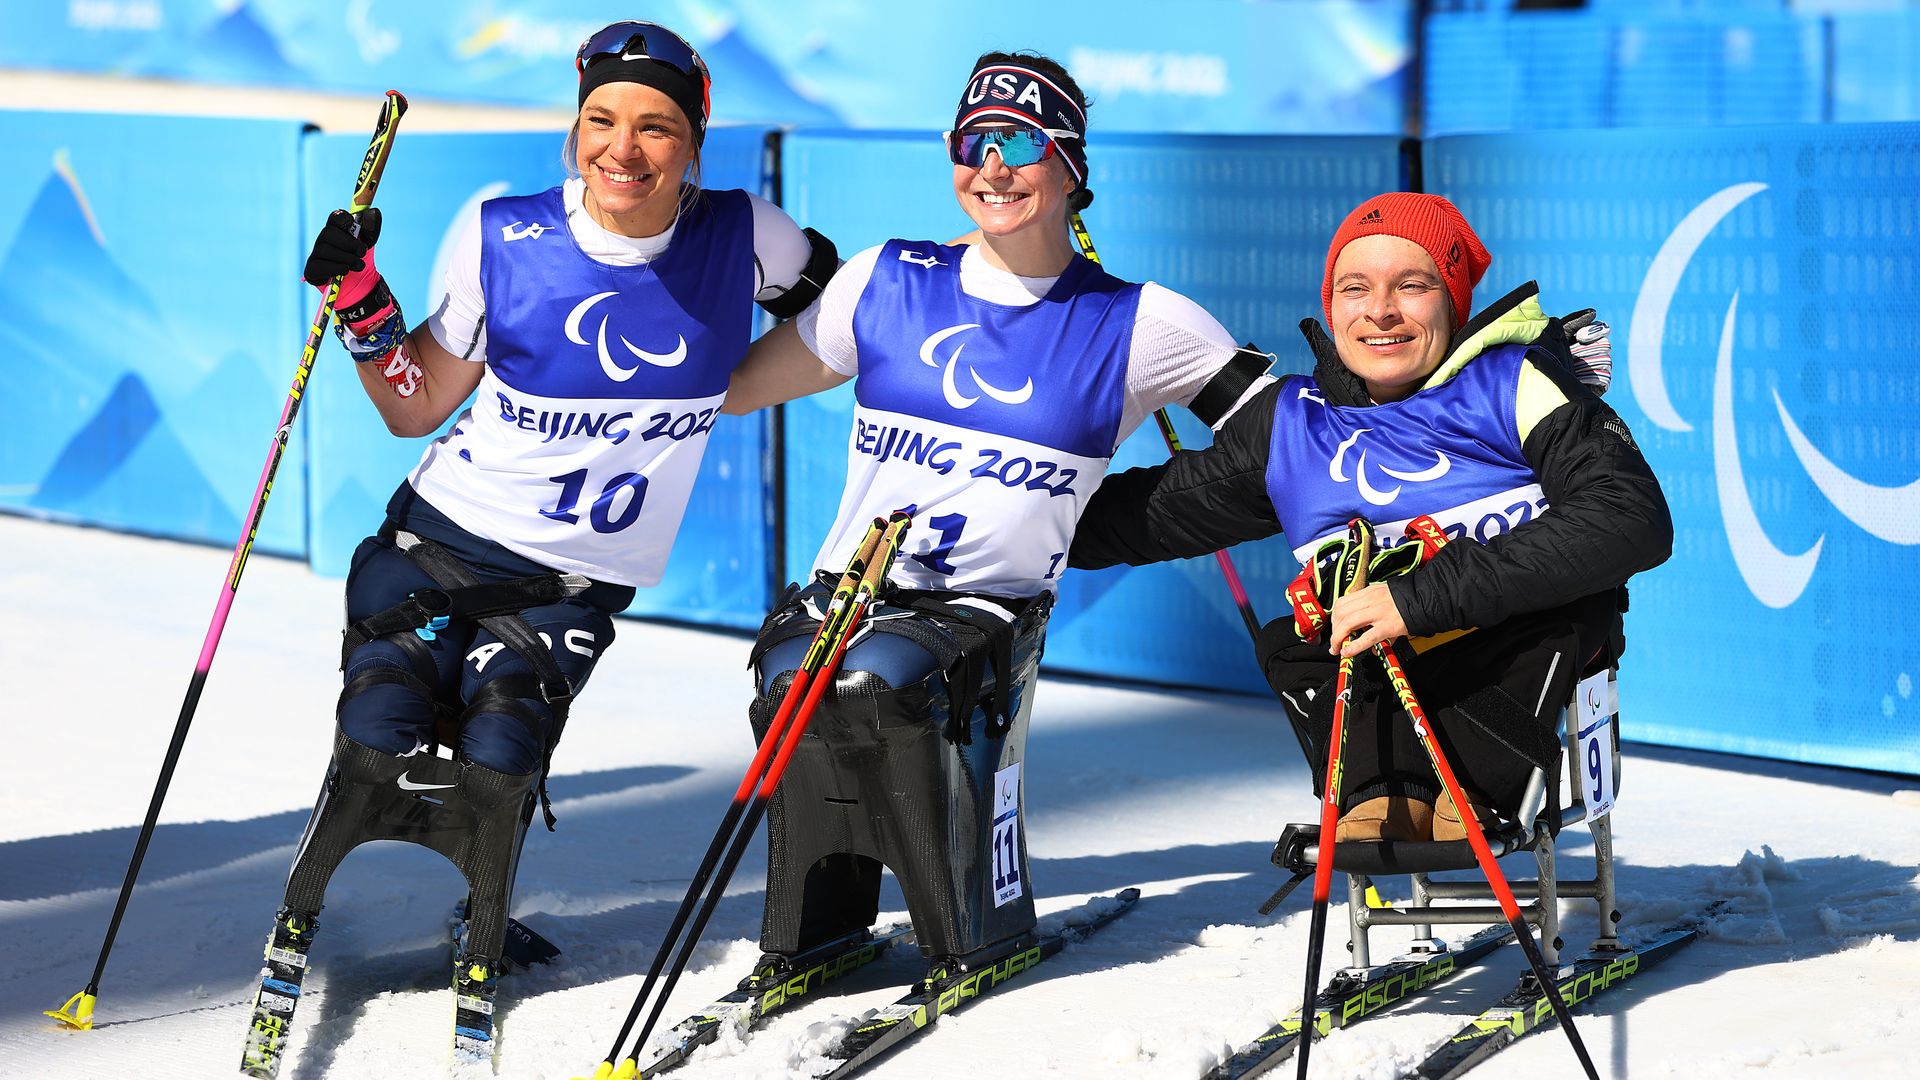 Team USA's Oksana Masters, Kendall Gretsch and bronze medalist Anja Wickers of Team Germany at the Para Biathlon Women's Middle Distance Sitting flower ceremony March 8 in China.